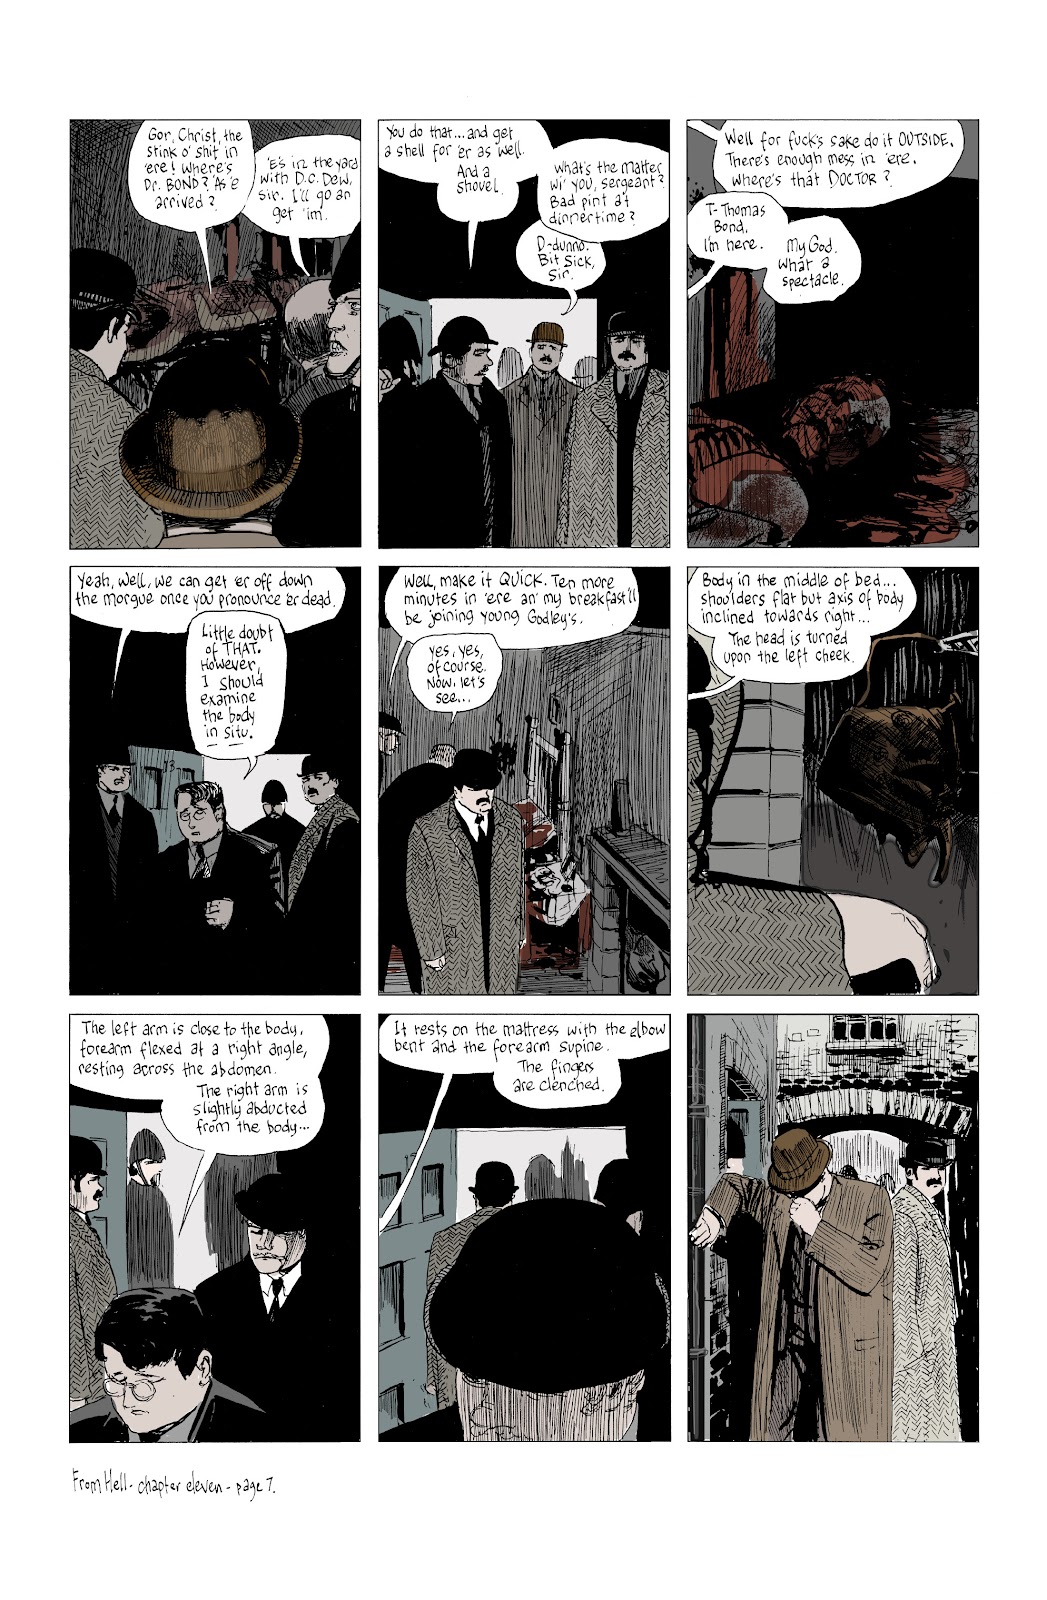 From Hell: Master Edition issue 8 - Page 11